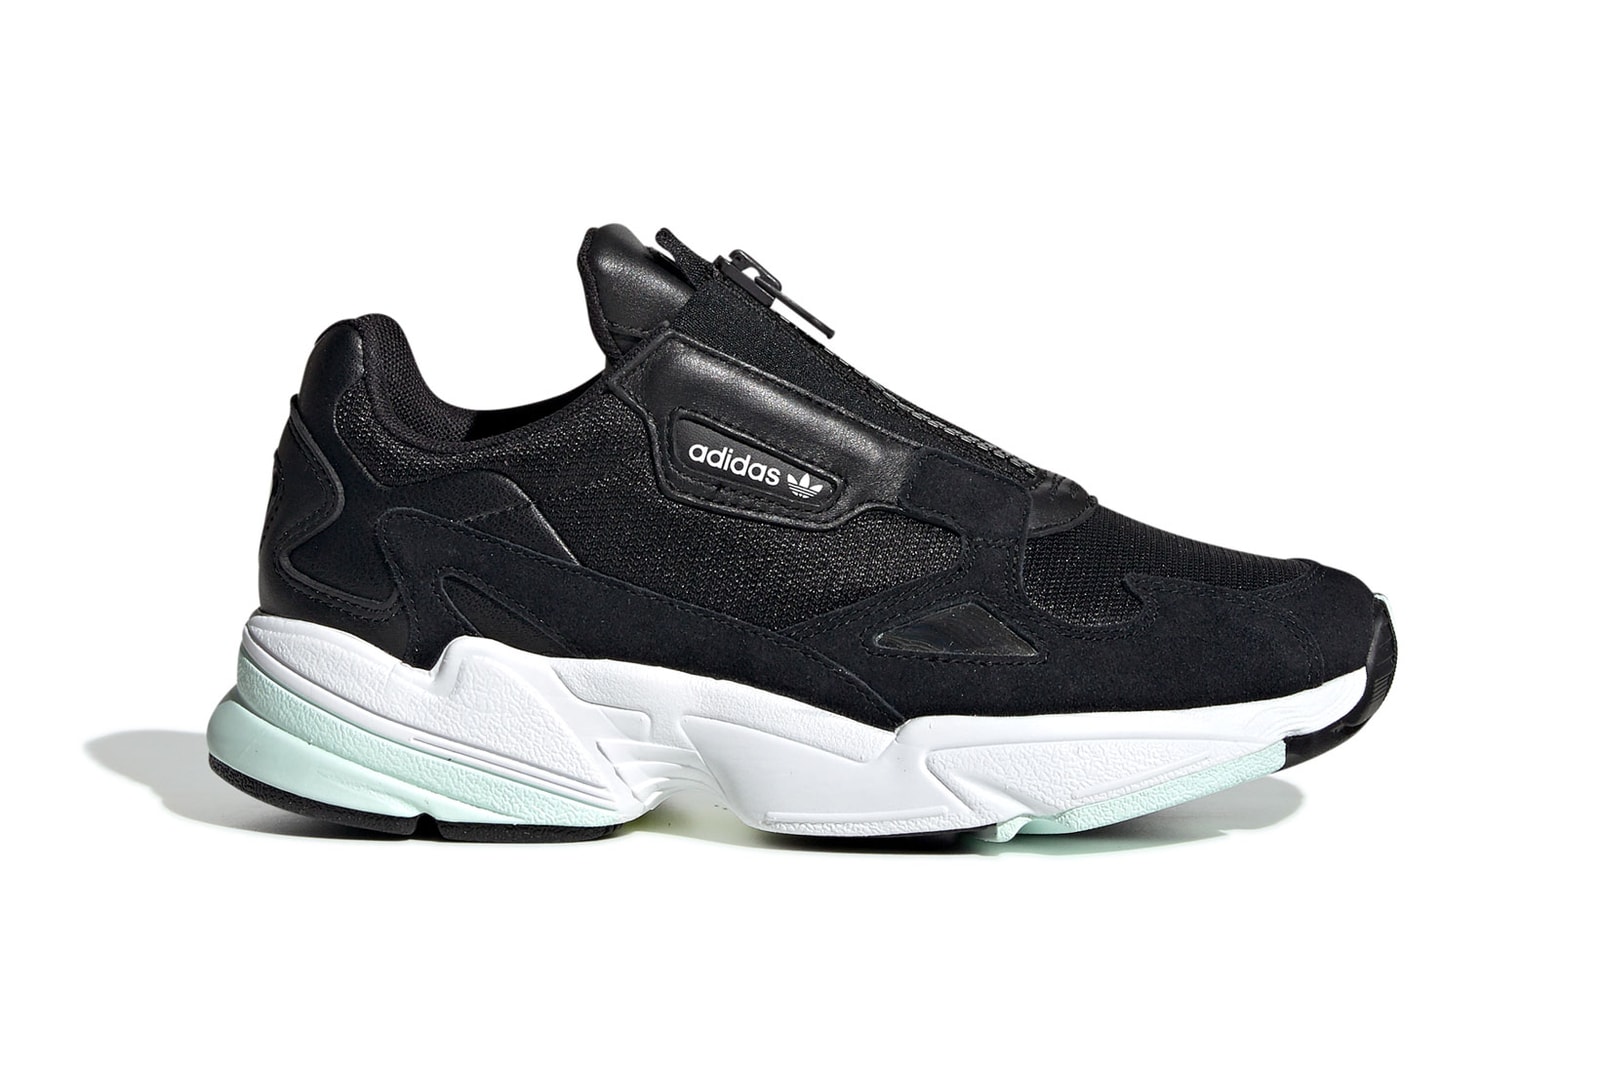 Forbedre håndbevægelse Panorama adidas Falcon Zip in Black and White | adidas classic airliner bag sale |  Iicf